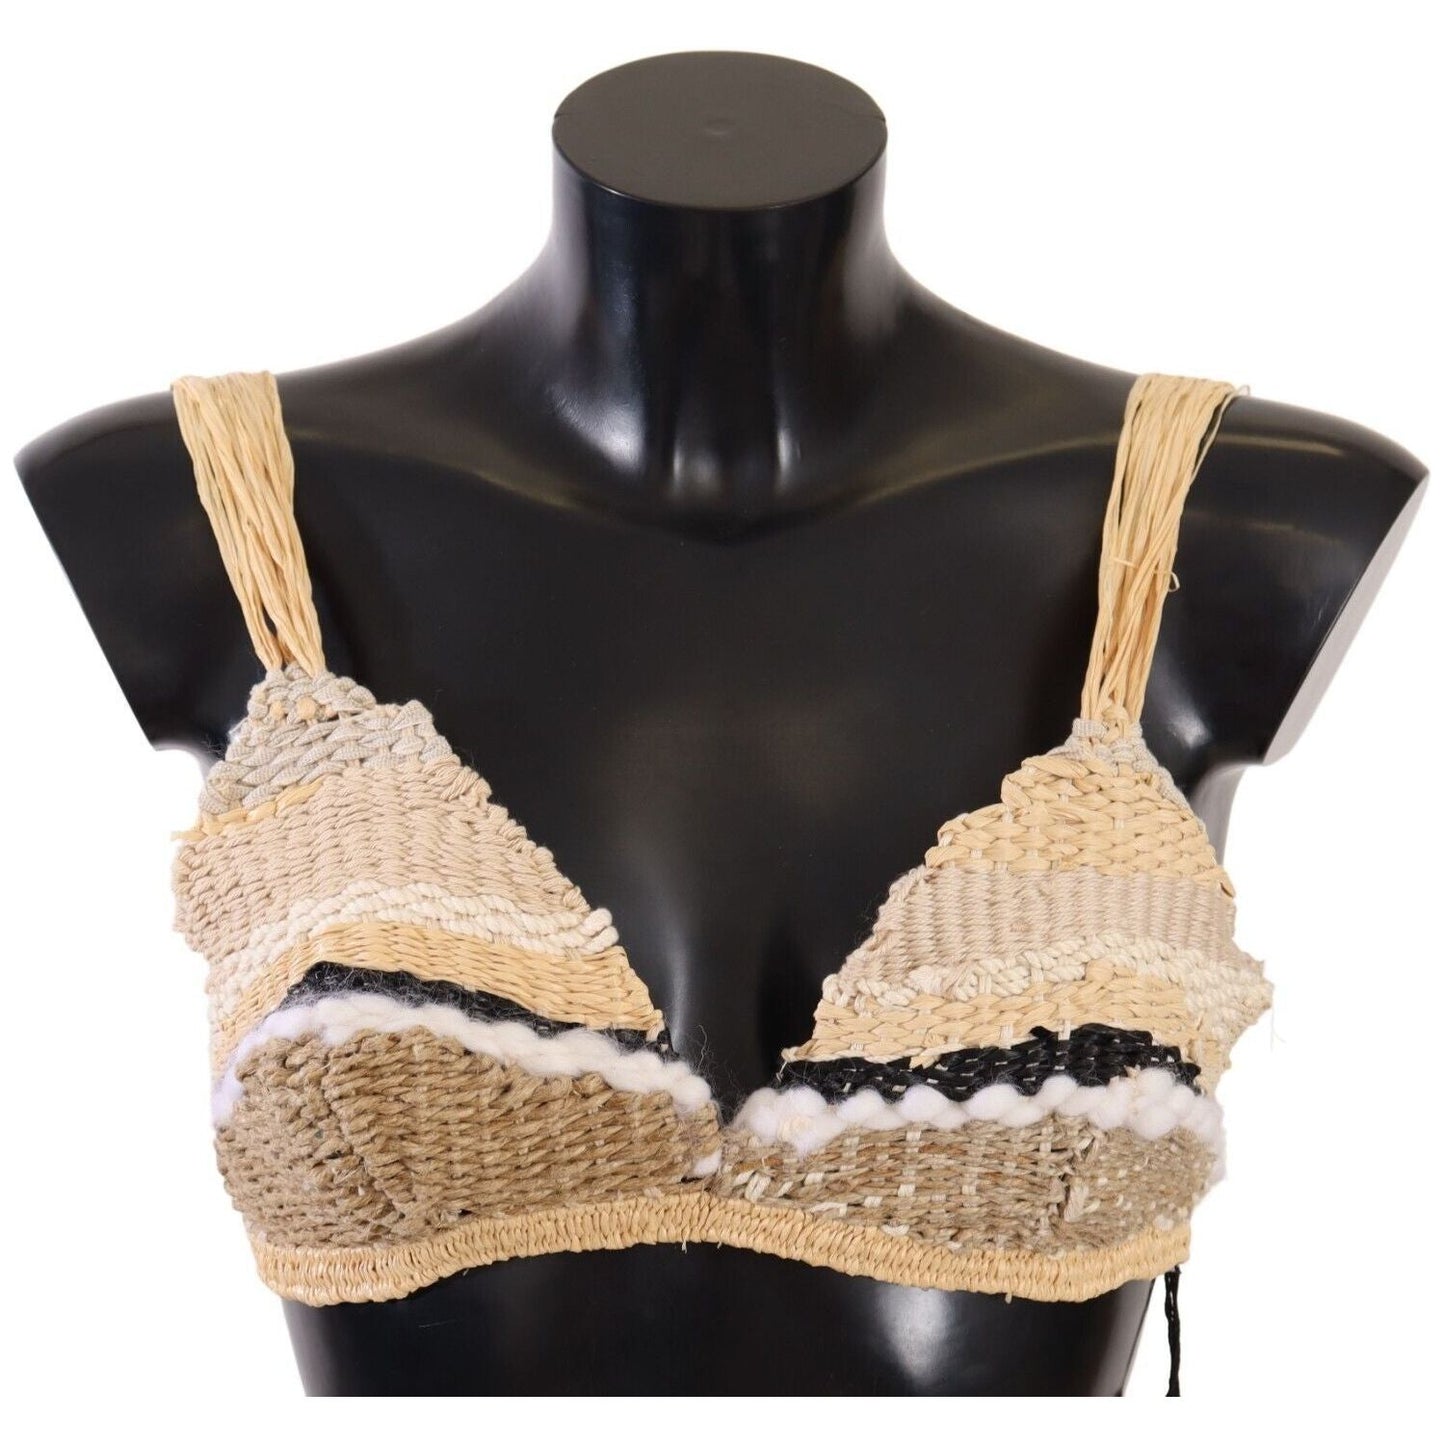 Dolce & Gabbana Chic Beige Crochet Cropped Top WOMAN TOPS AND SHIRTS beige-straw-raffia-woven-crochet-cover-up-top